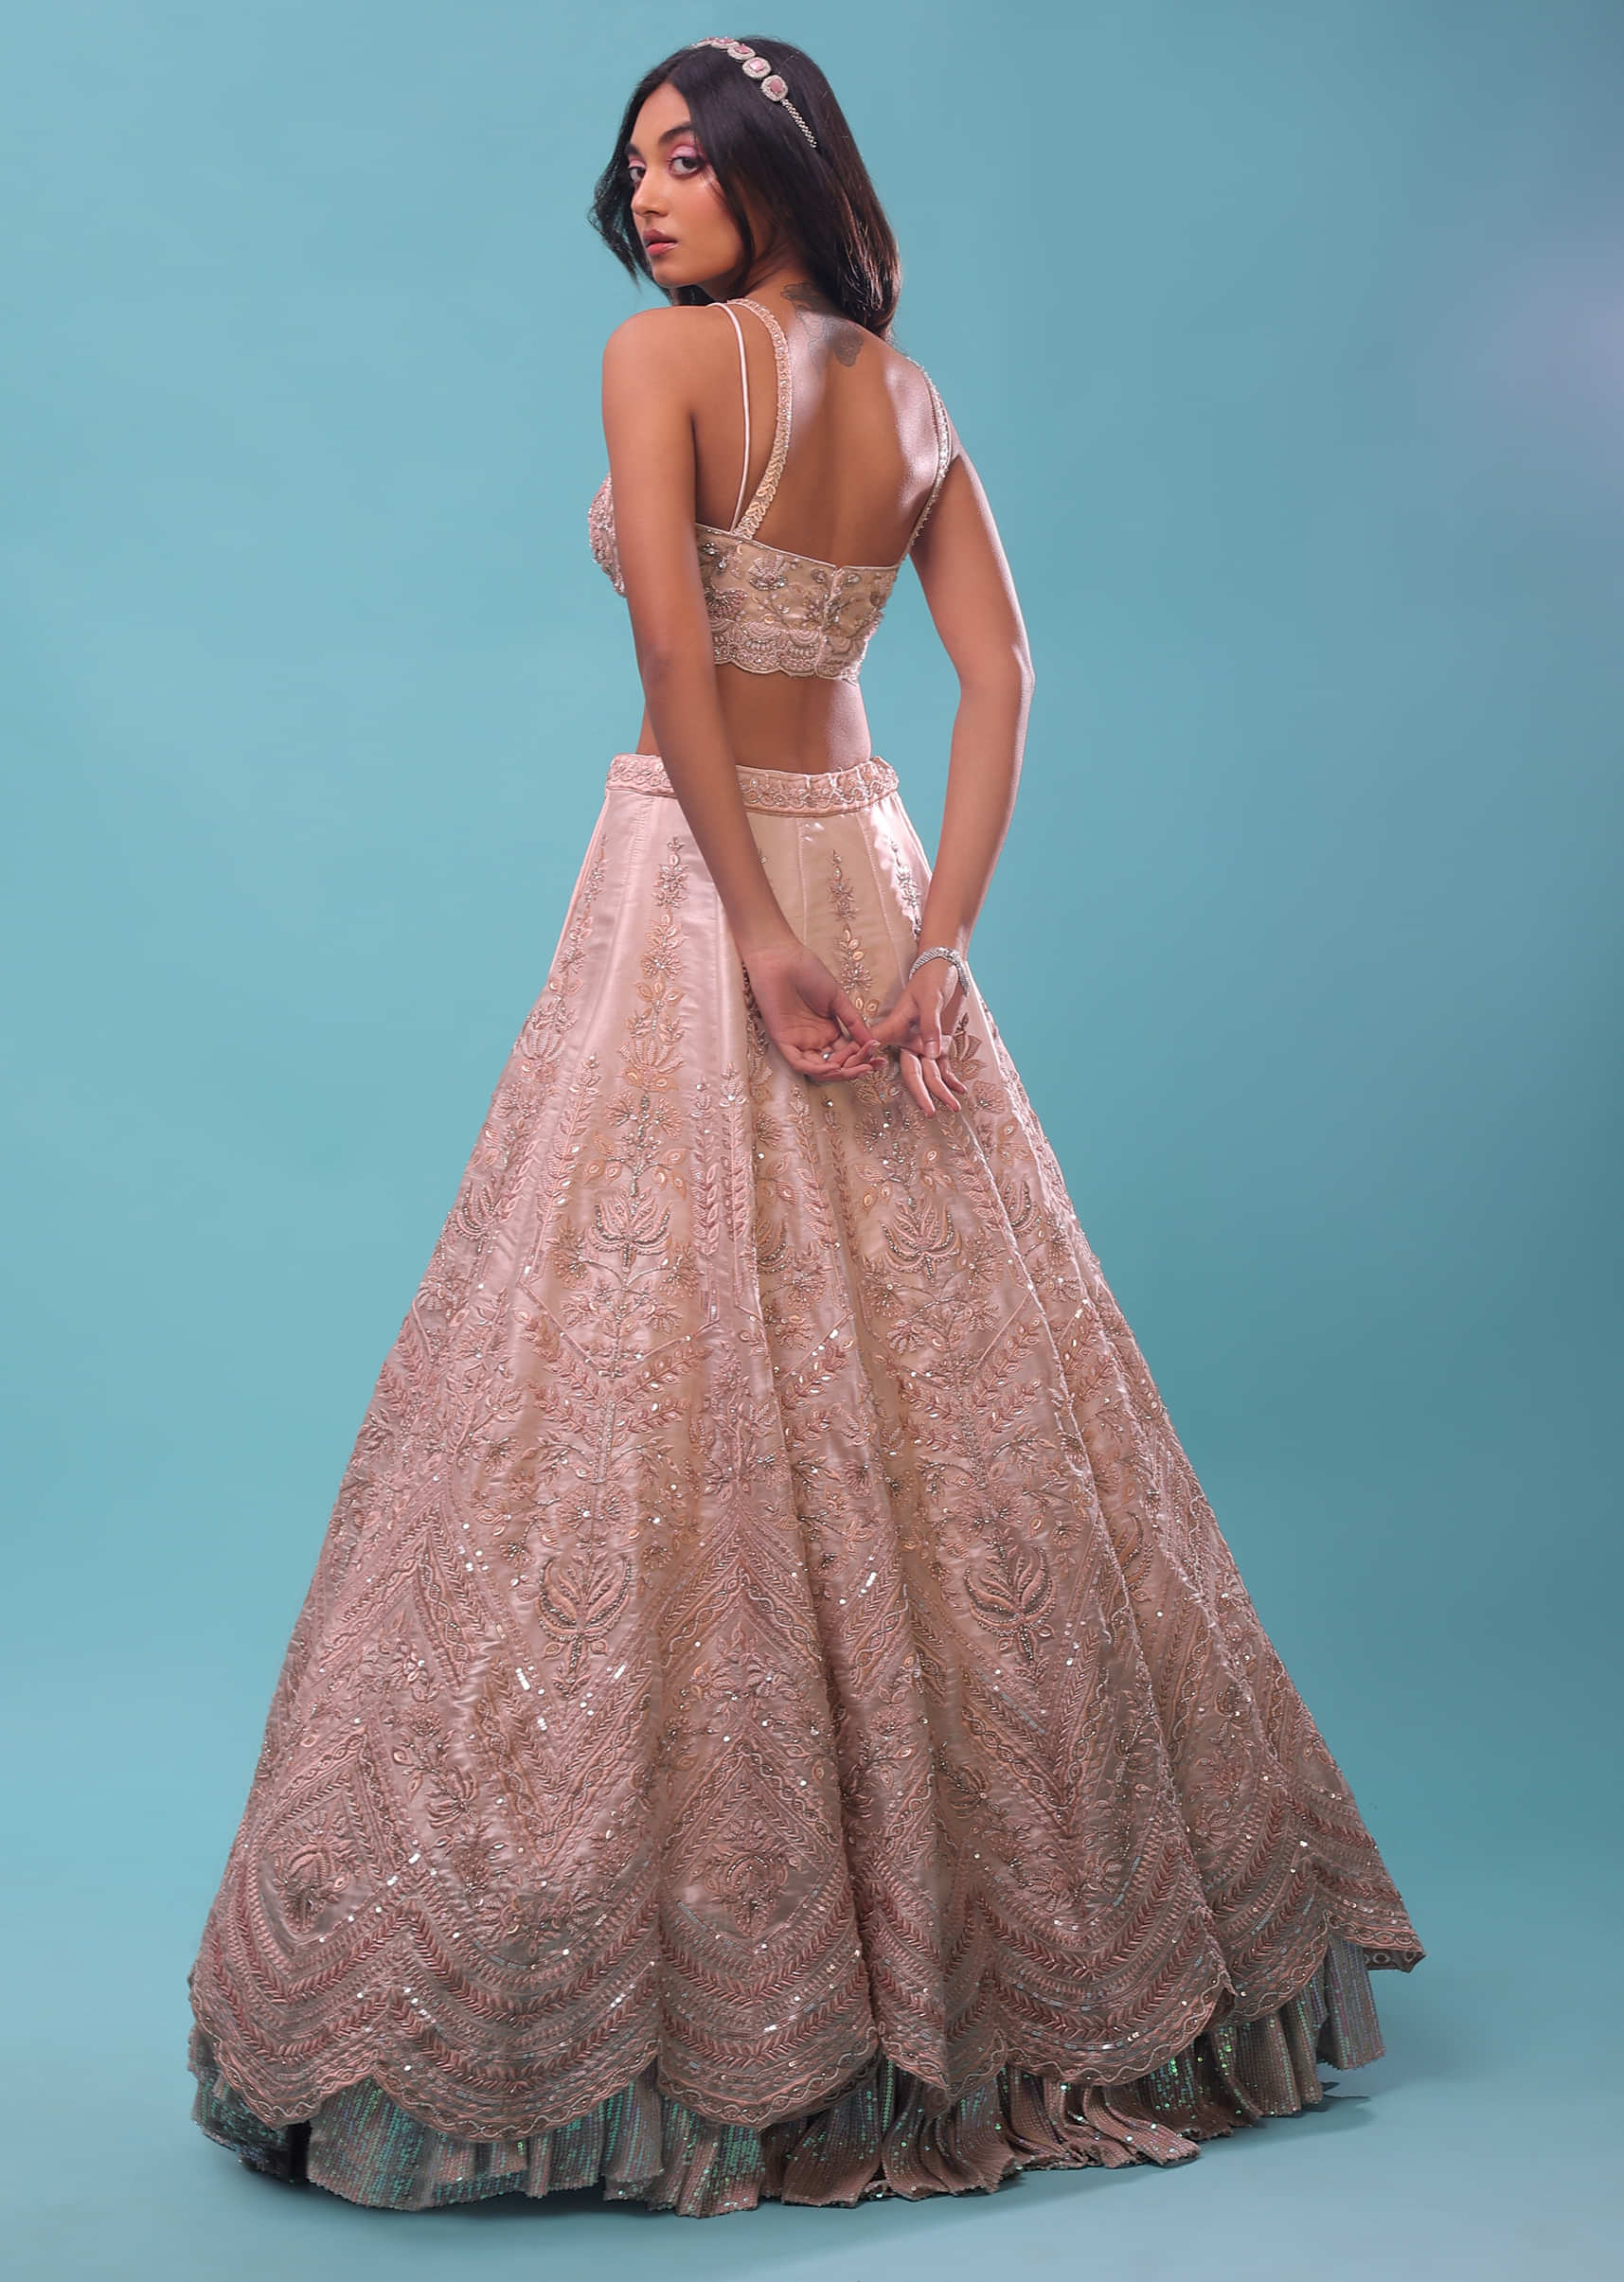 Powder Pink Lehenga And A Crop Top In Floral Resham Embroidery, Crop Top Comes In Spagetti Strap And Corset Neckline 